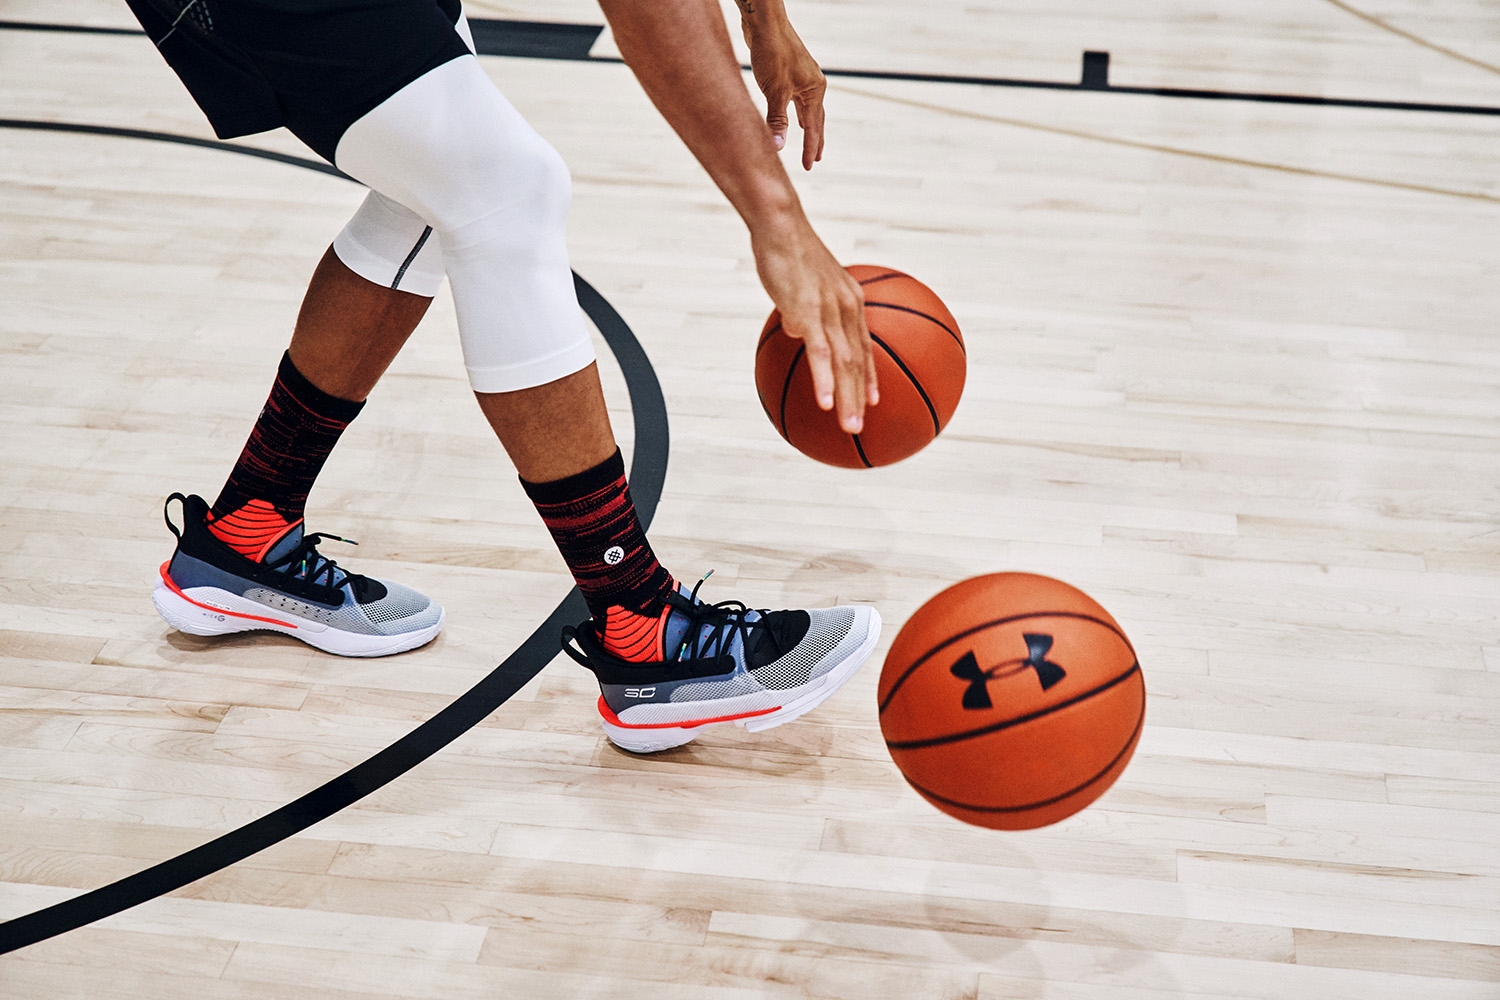 Marked fellowship Oswald Under Armour Posts $60M Net Loss in Q4 As Stock Price Drops